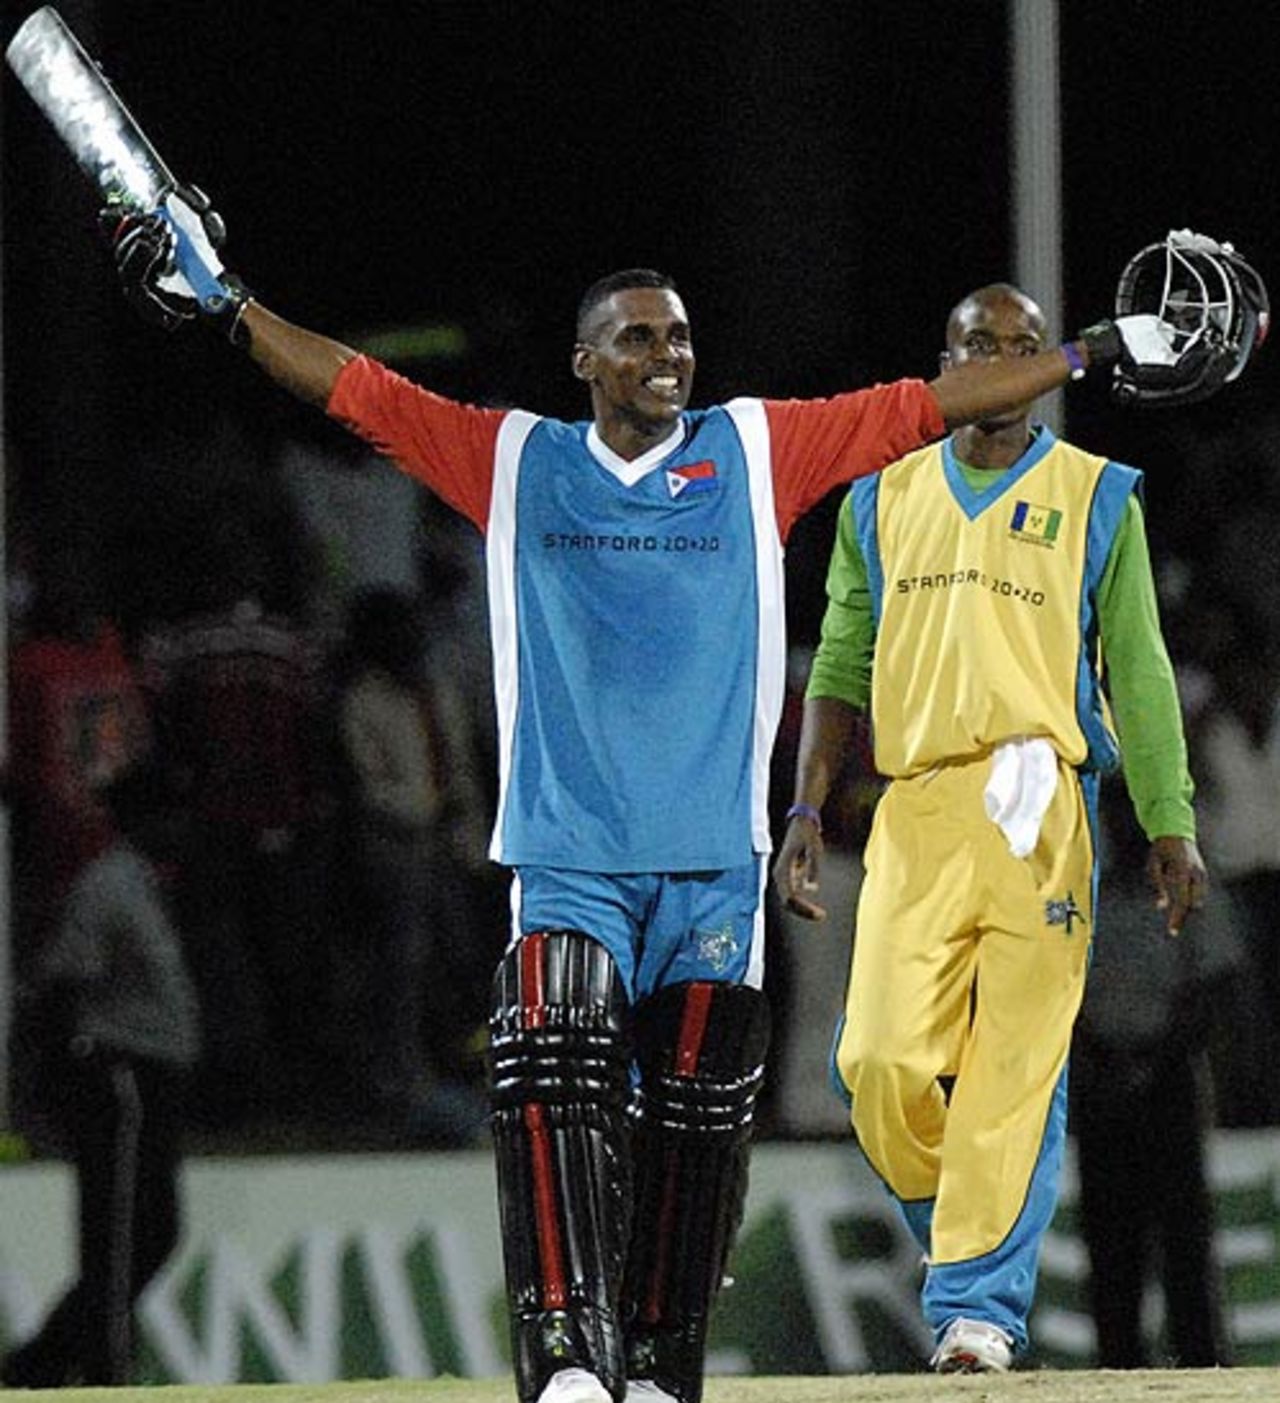 John Eugene acknowledges the cheers after scoring an unbeaten 100 off 46 balls, St Maarten v St Vincent and the Grenadines, 6th match, Stanford 20/20, Antigua, February 1, 2008